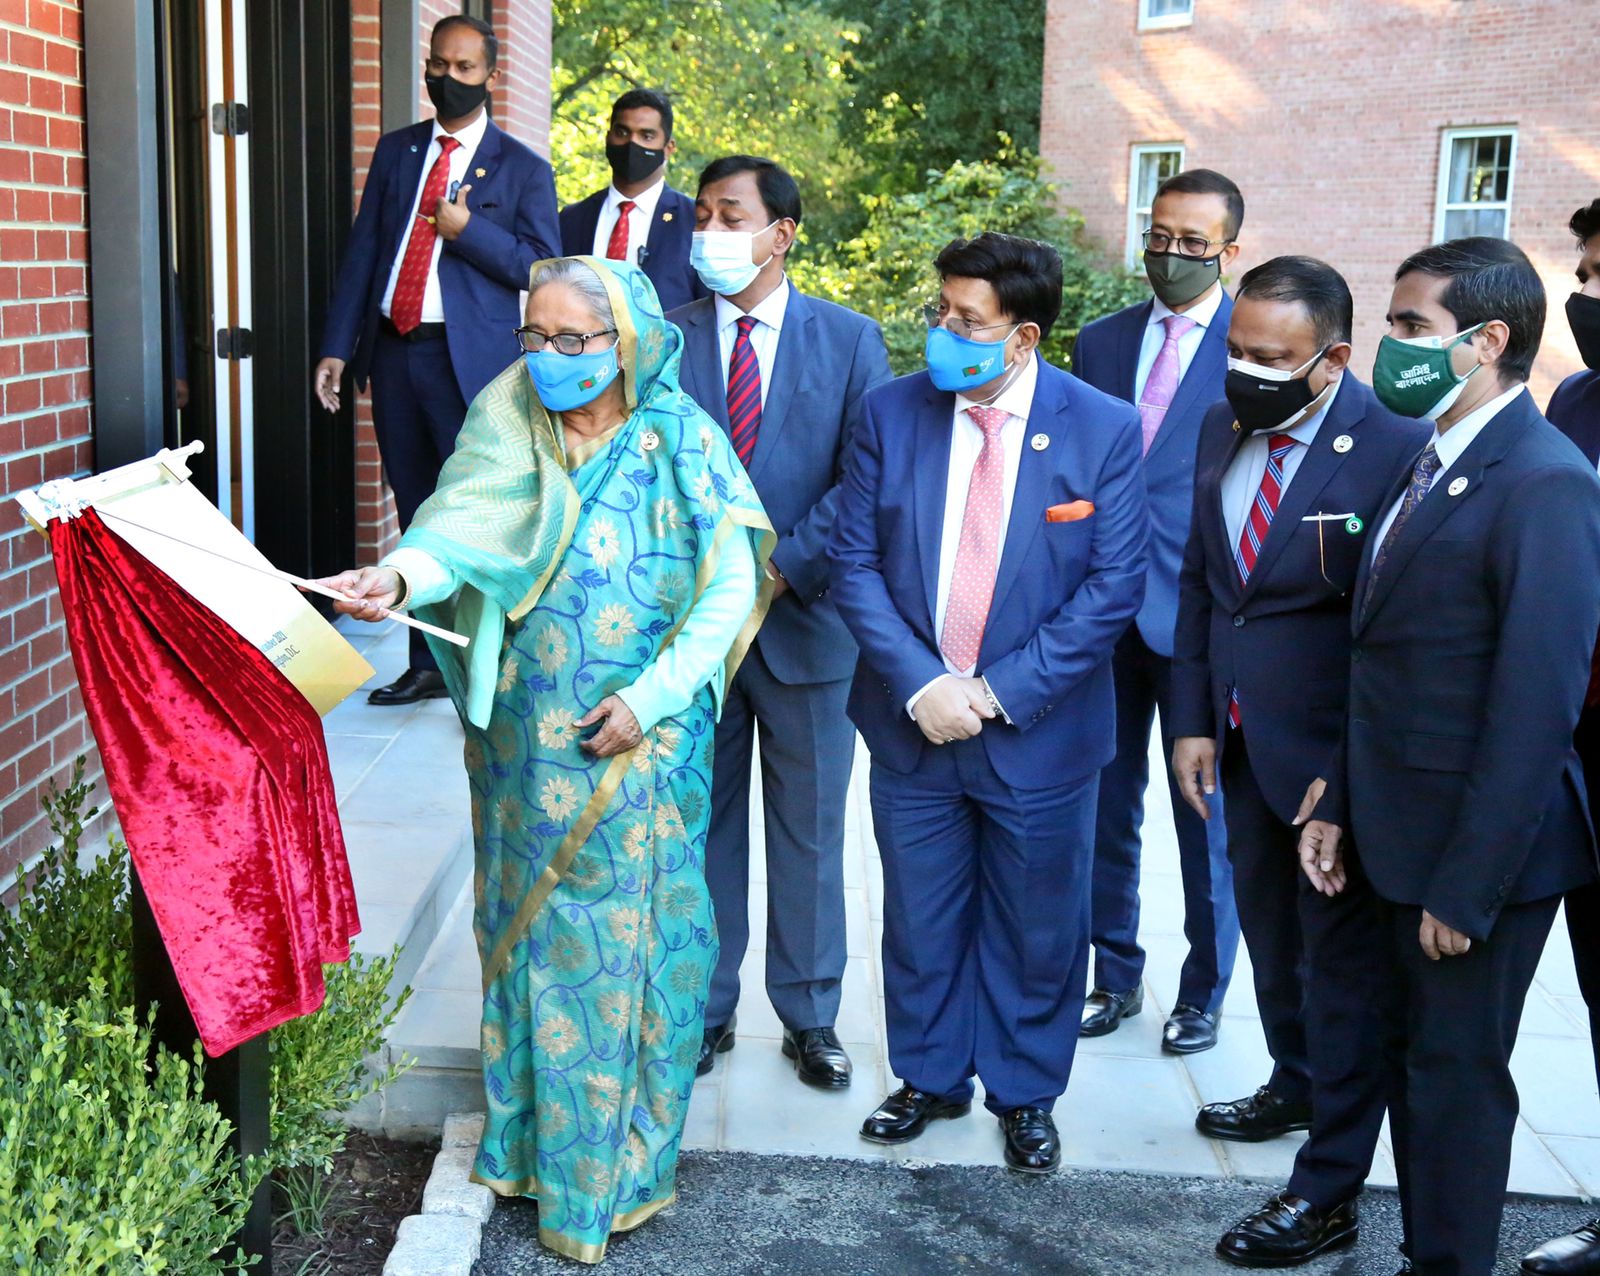 The Prime Minister inaugurated Bangladesh House in Maryland